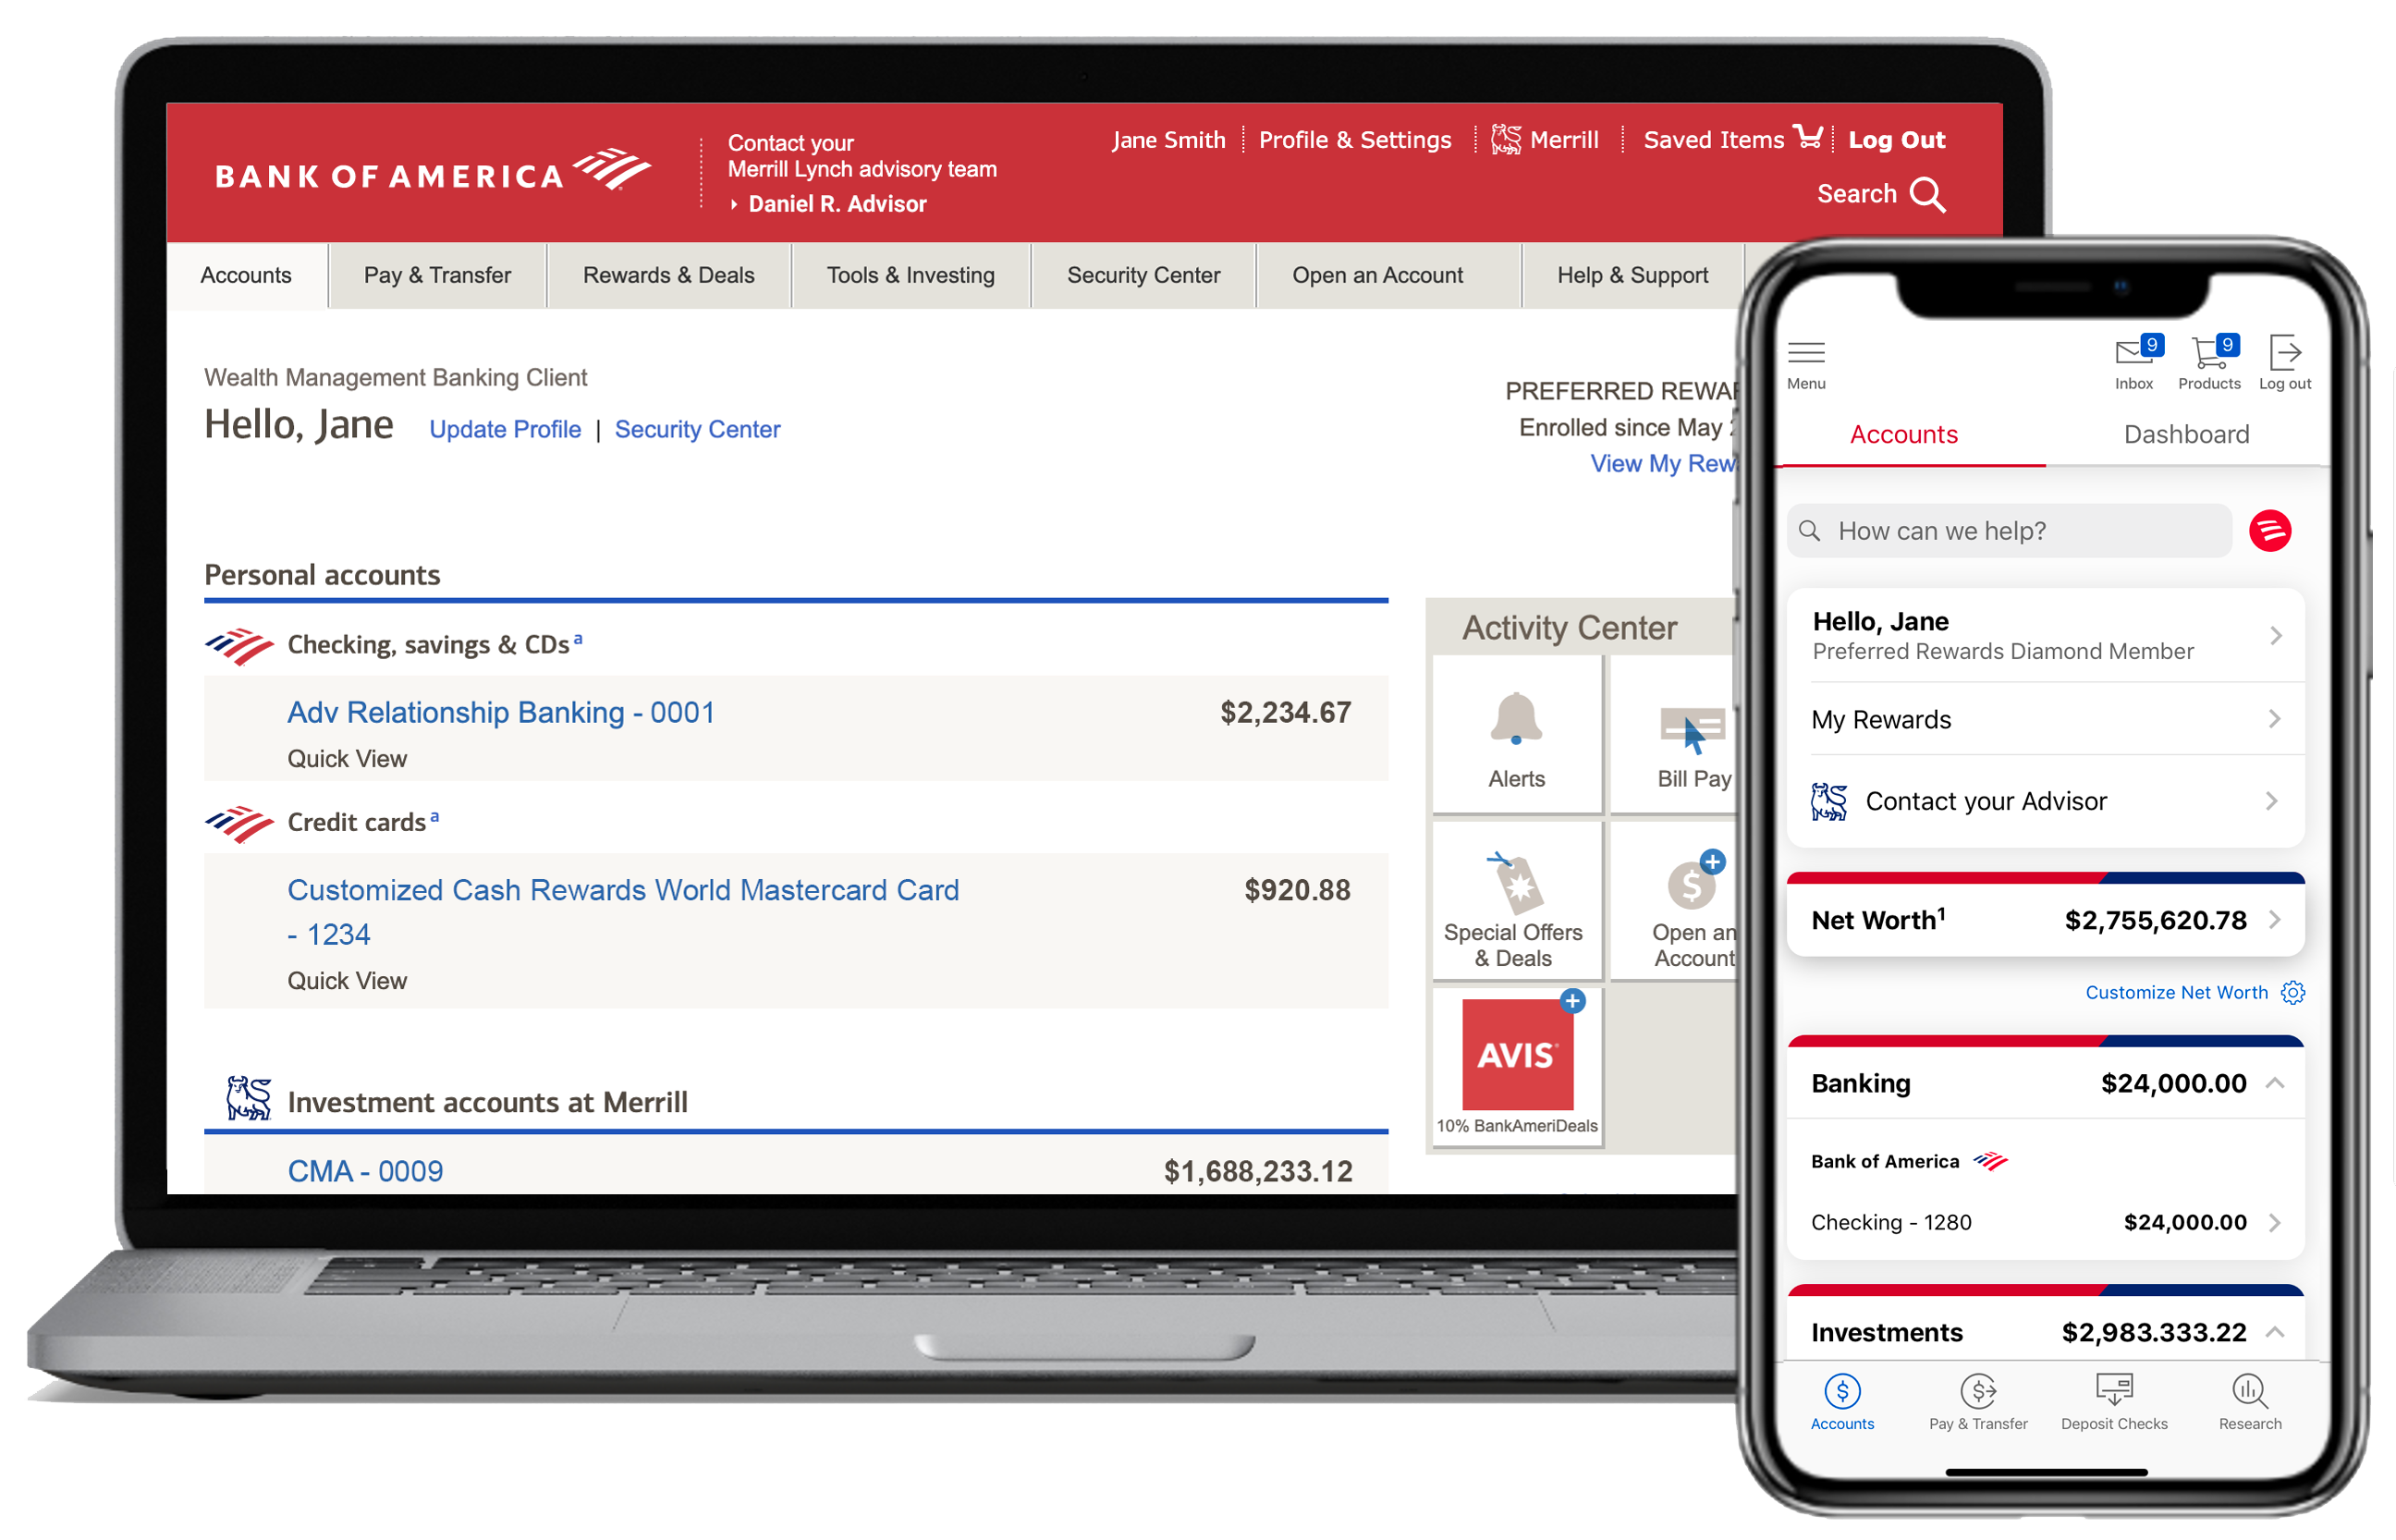 example of the Merrill online desktop and mobile information on the left. The second image shows a Bank of America online desktop and mobile information on the right.